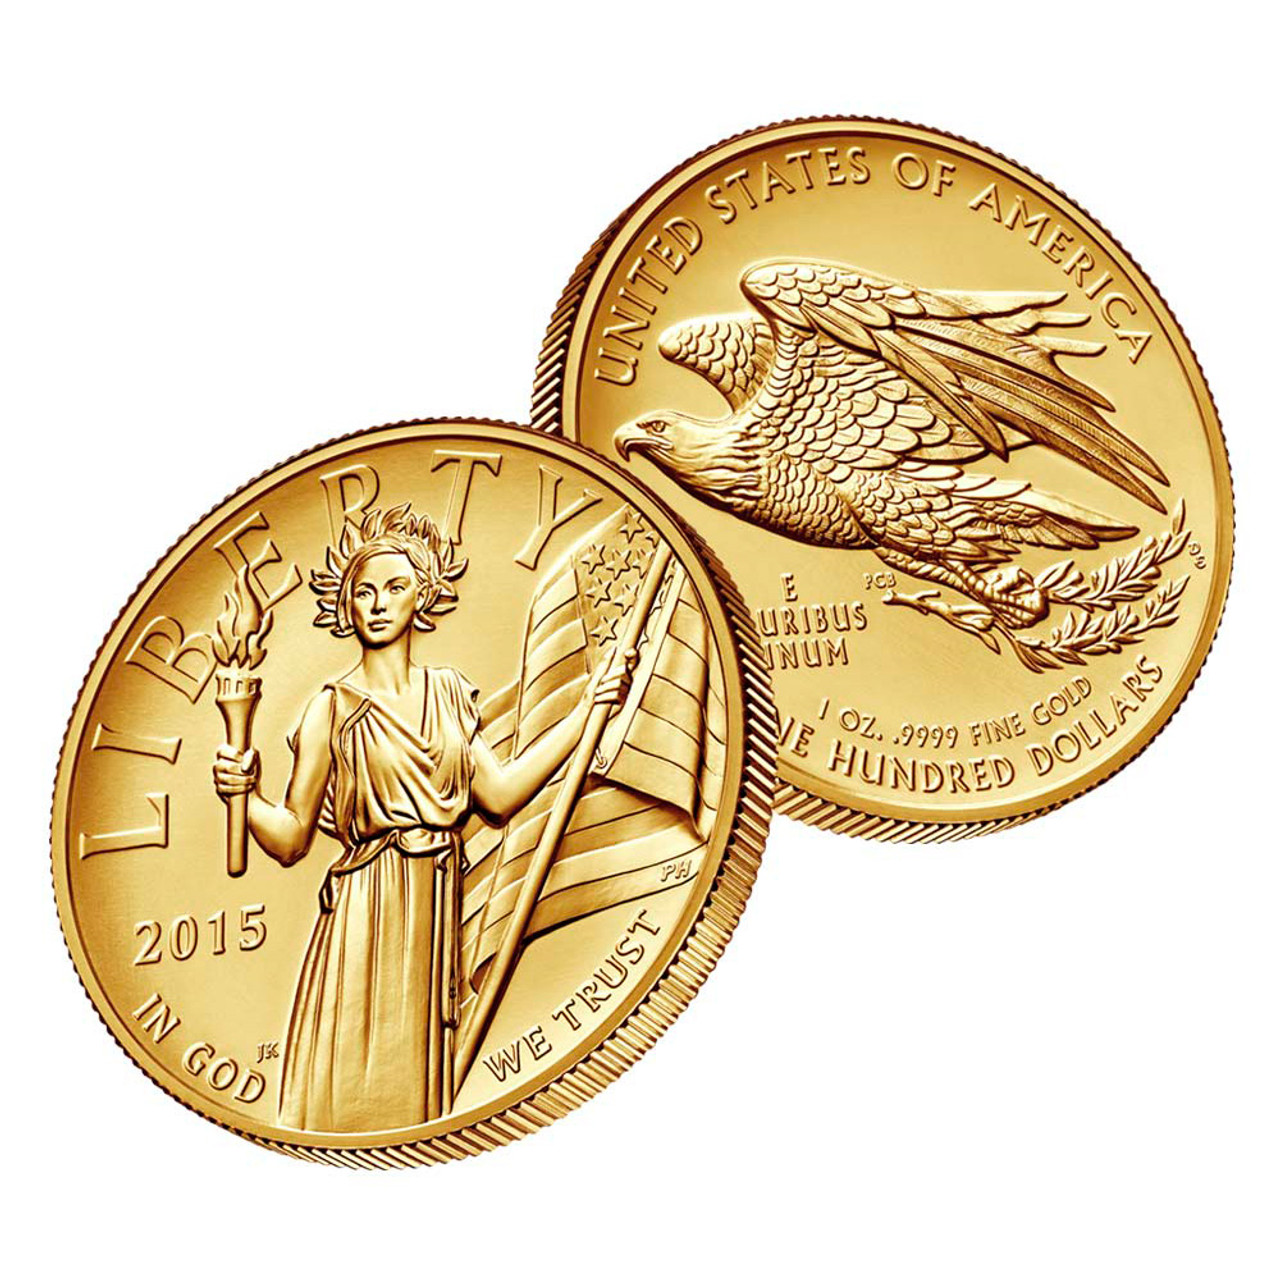 2015 W Us Gold 100 American Liberty High Relief Coin Us 15 W Hr Bu